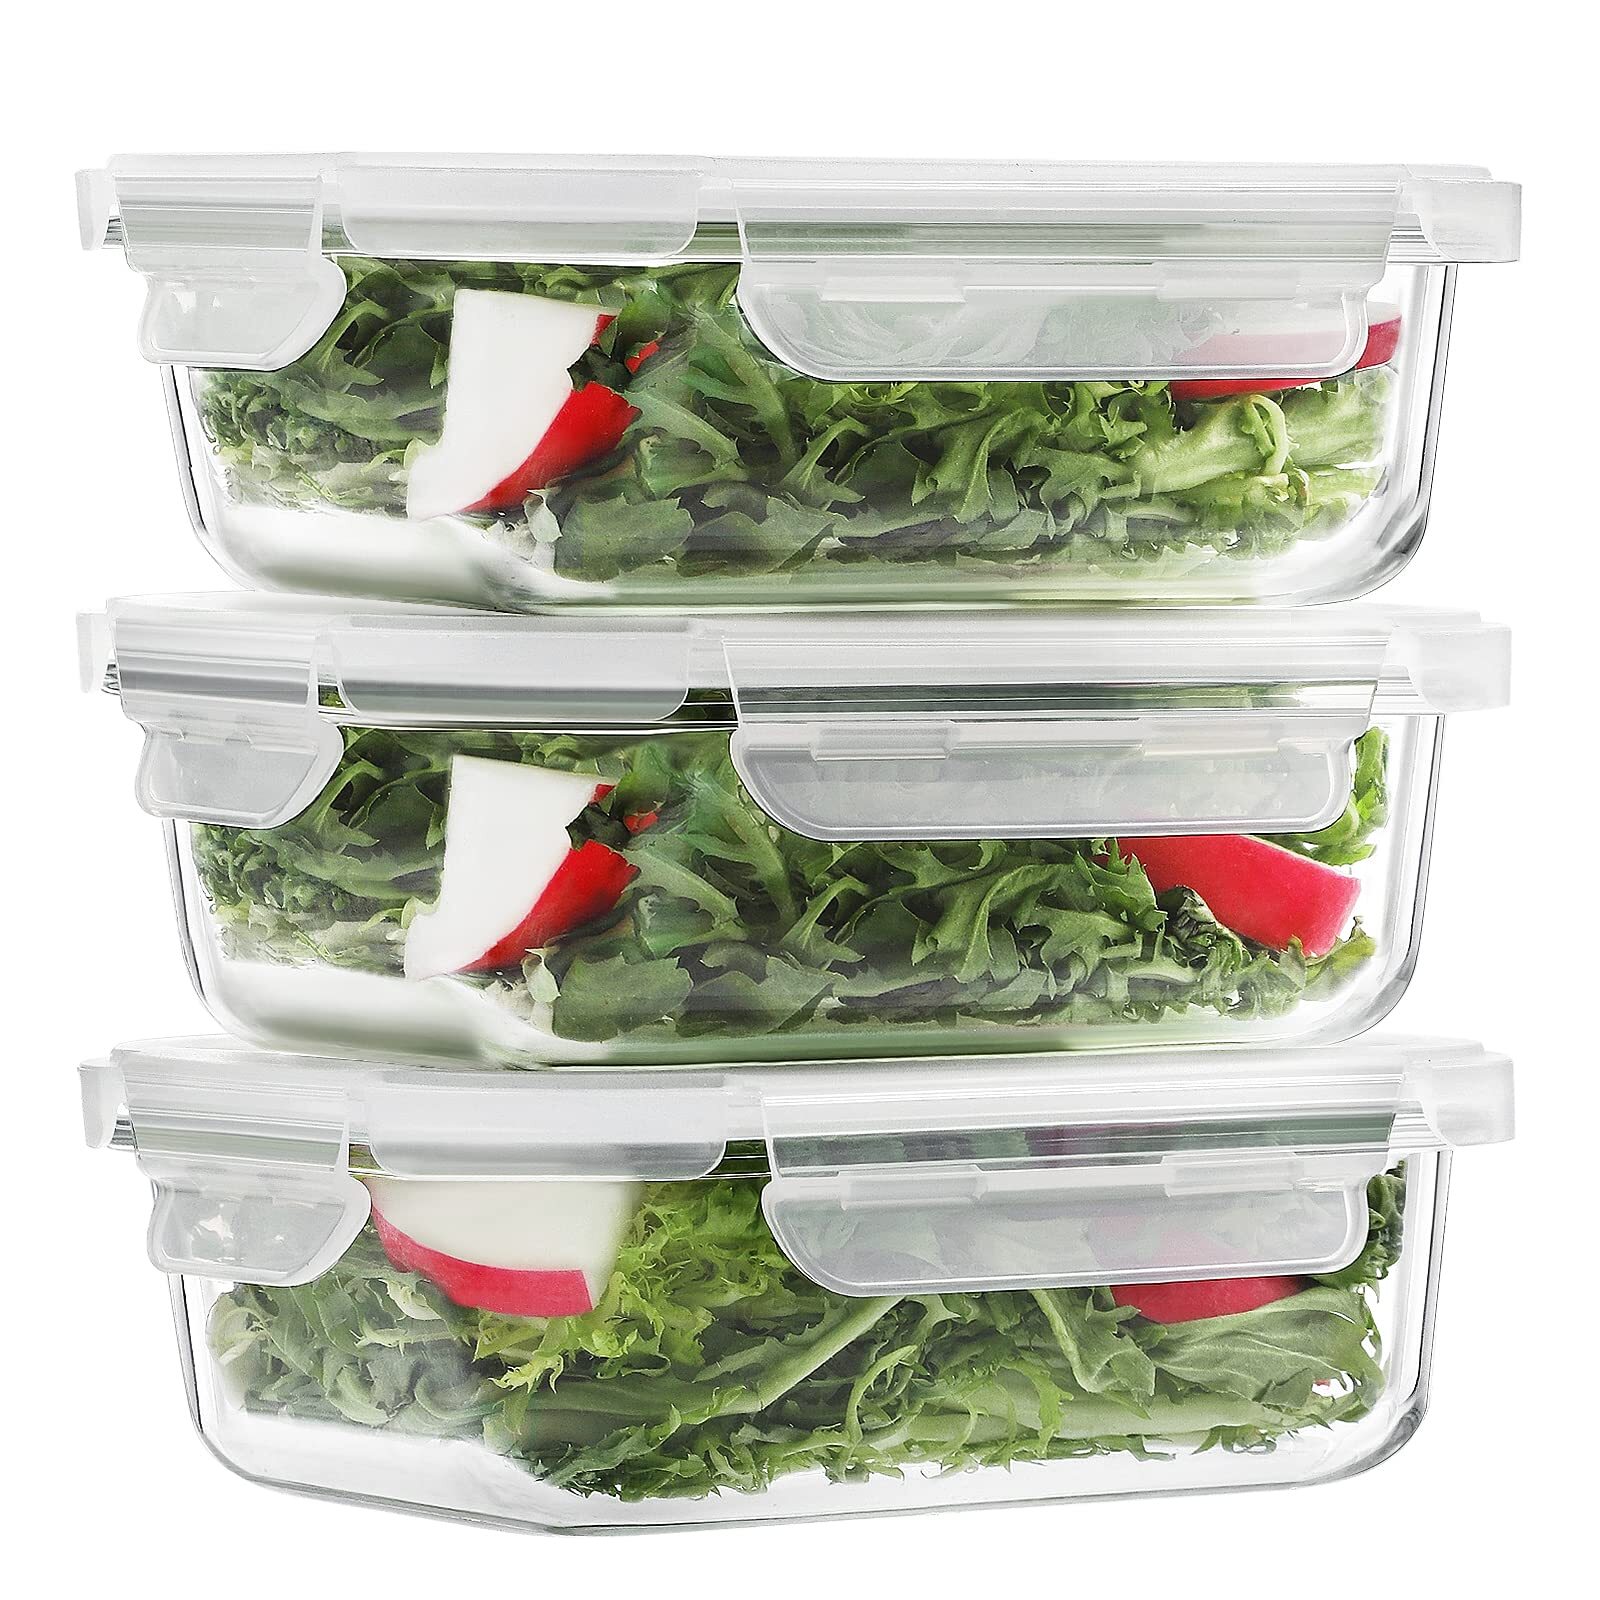 10 Pack Glass Meal Prep Containers, Glass Food Storage Containers with Lids, Airtight Glass Lunch Bento Boxes, BPA-Free & Leak Proof (10 lids & 10 Containers)